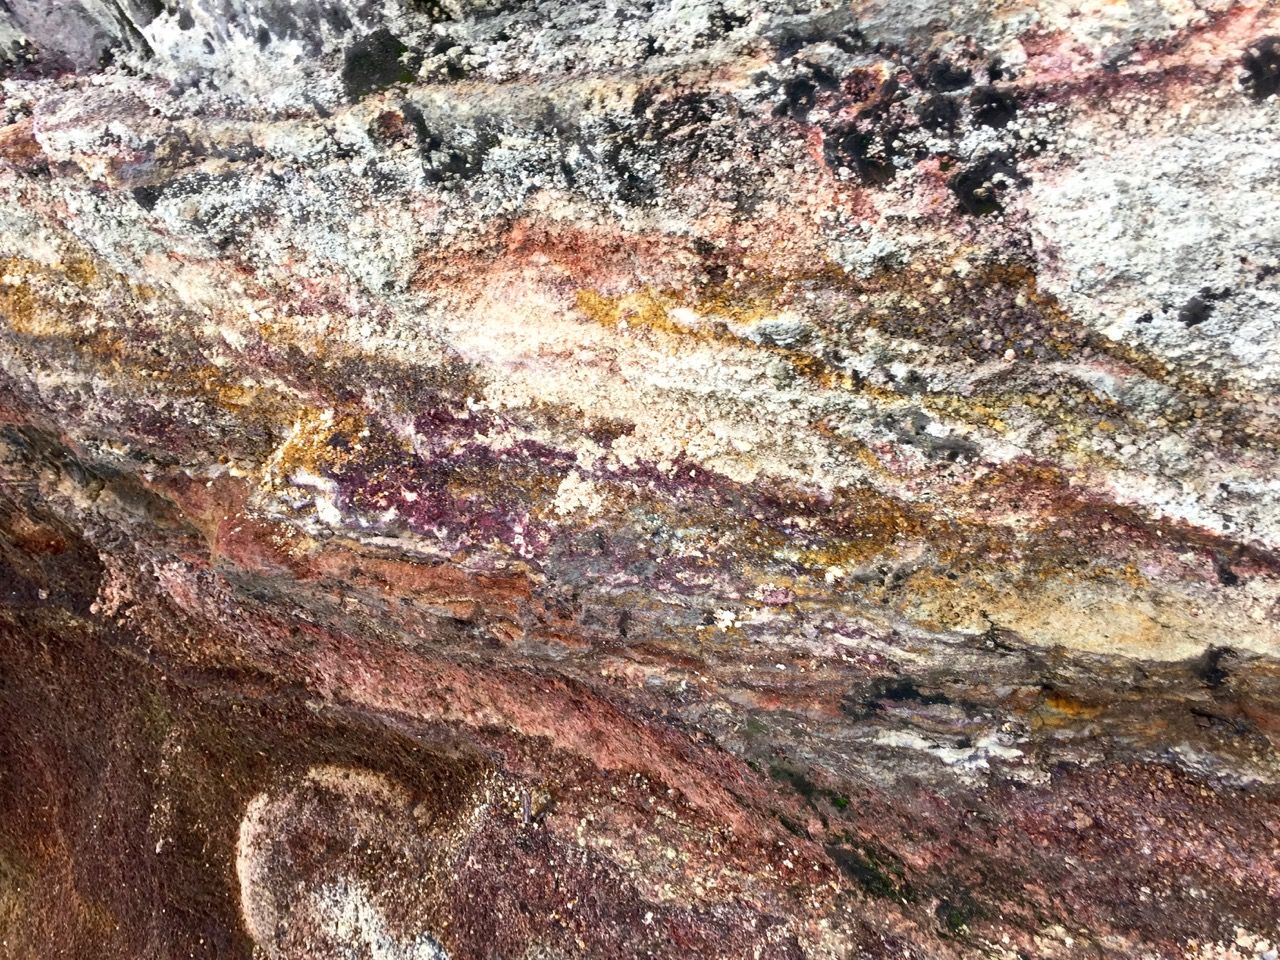 Multi-colored layers of rock on the trail down.